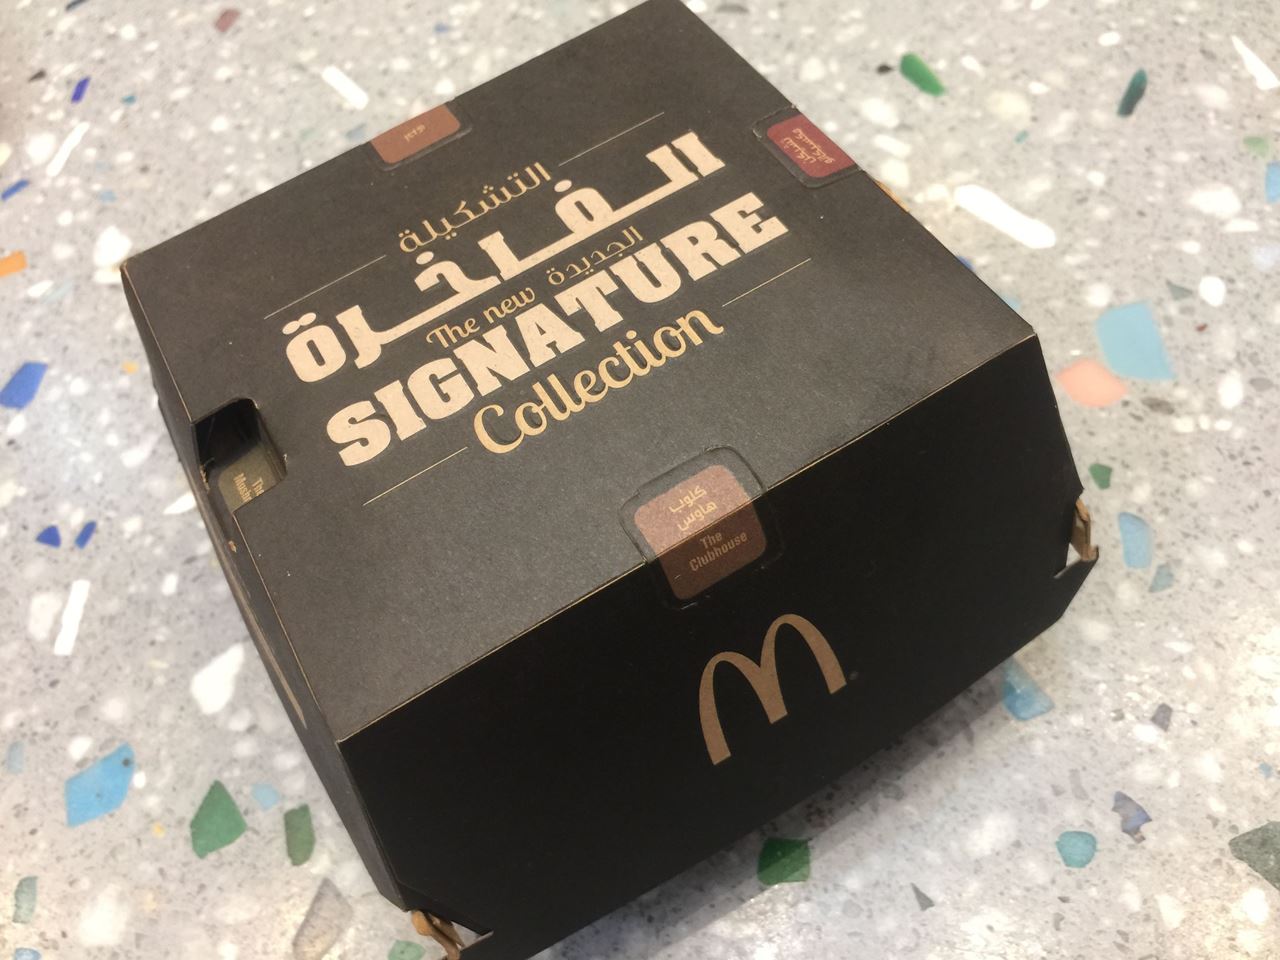 Review: McDonald's Signature Collection